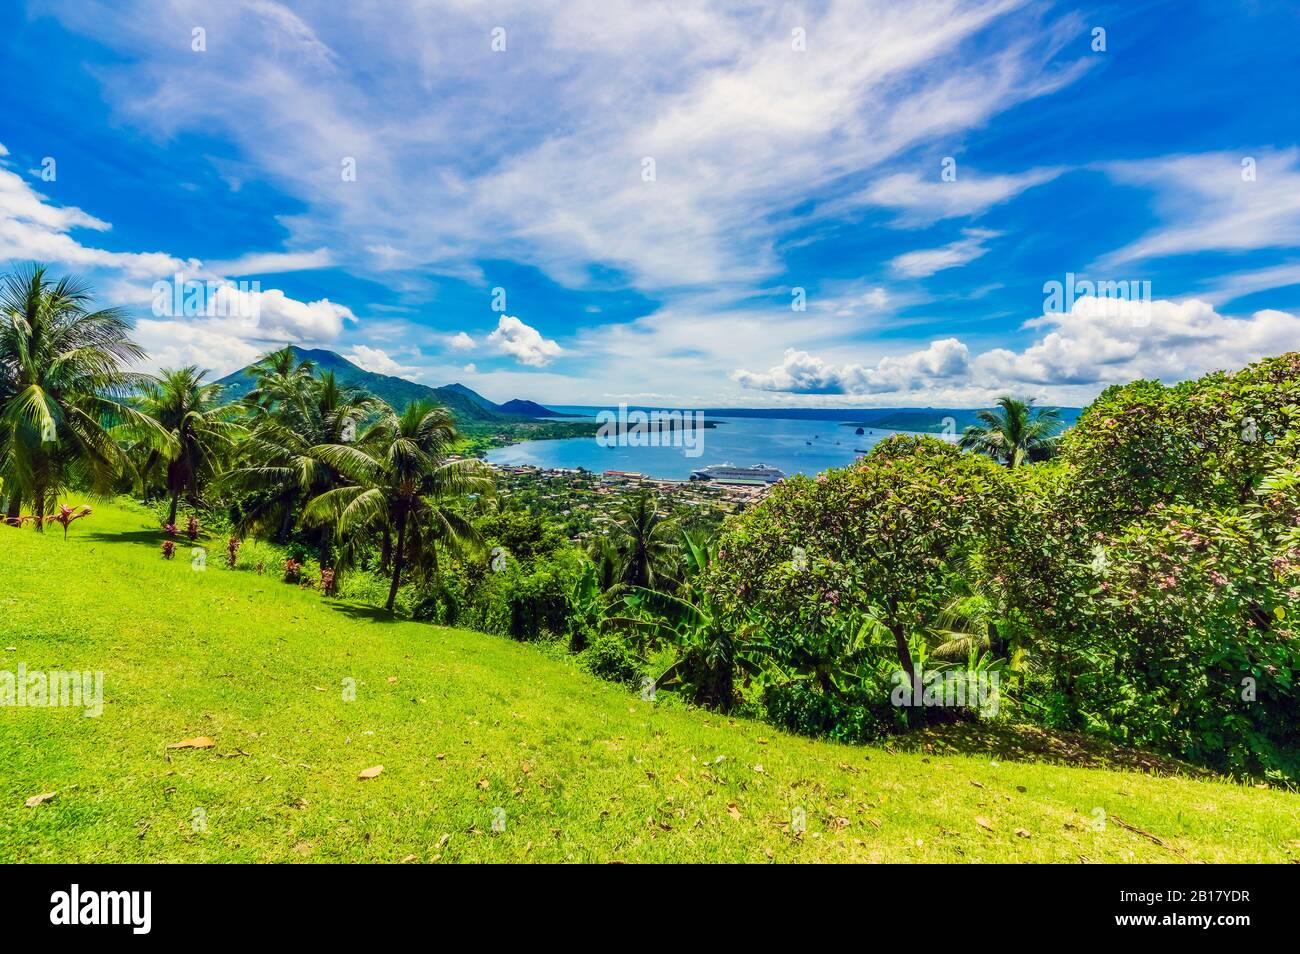 Papua New Guinea, East New Britain Province, Rabaul, Clouds over palm trees growing on green hillside of New Britain island Stock Photo